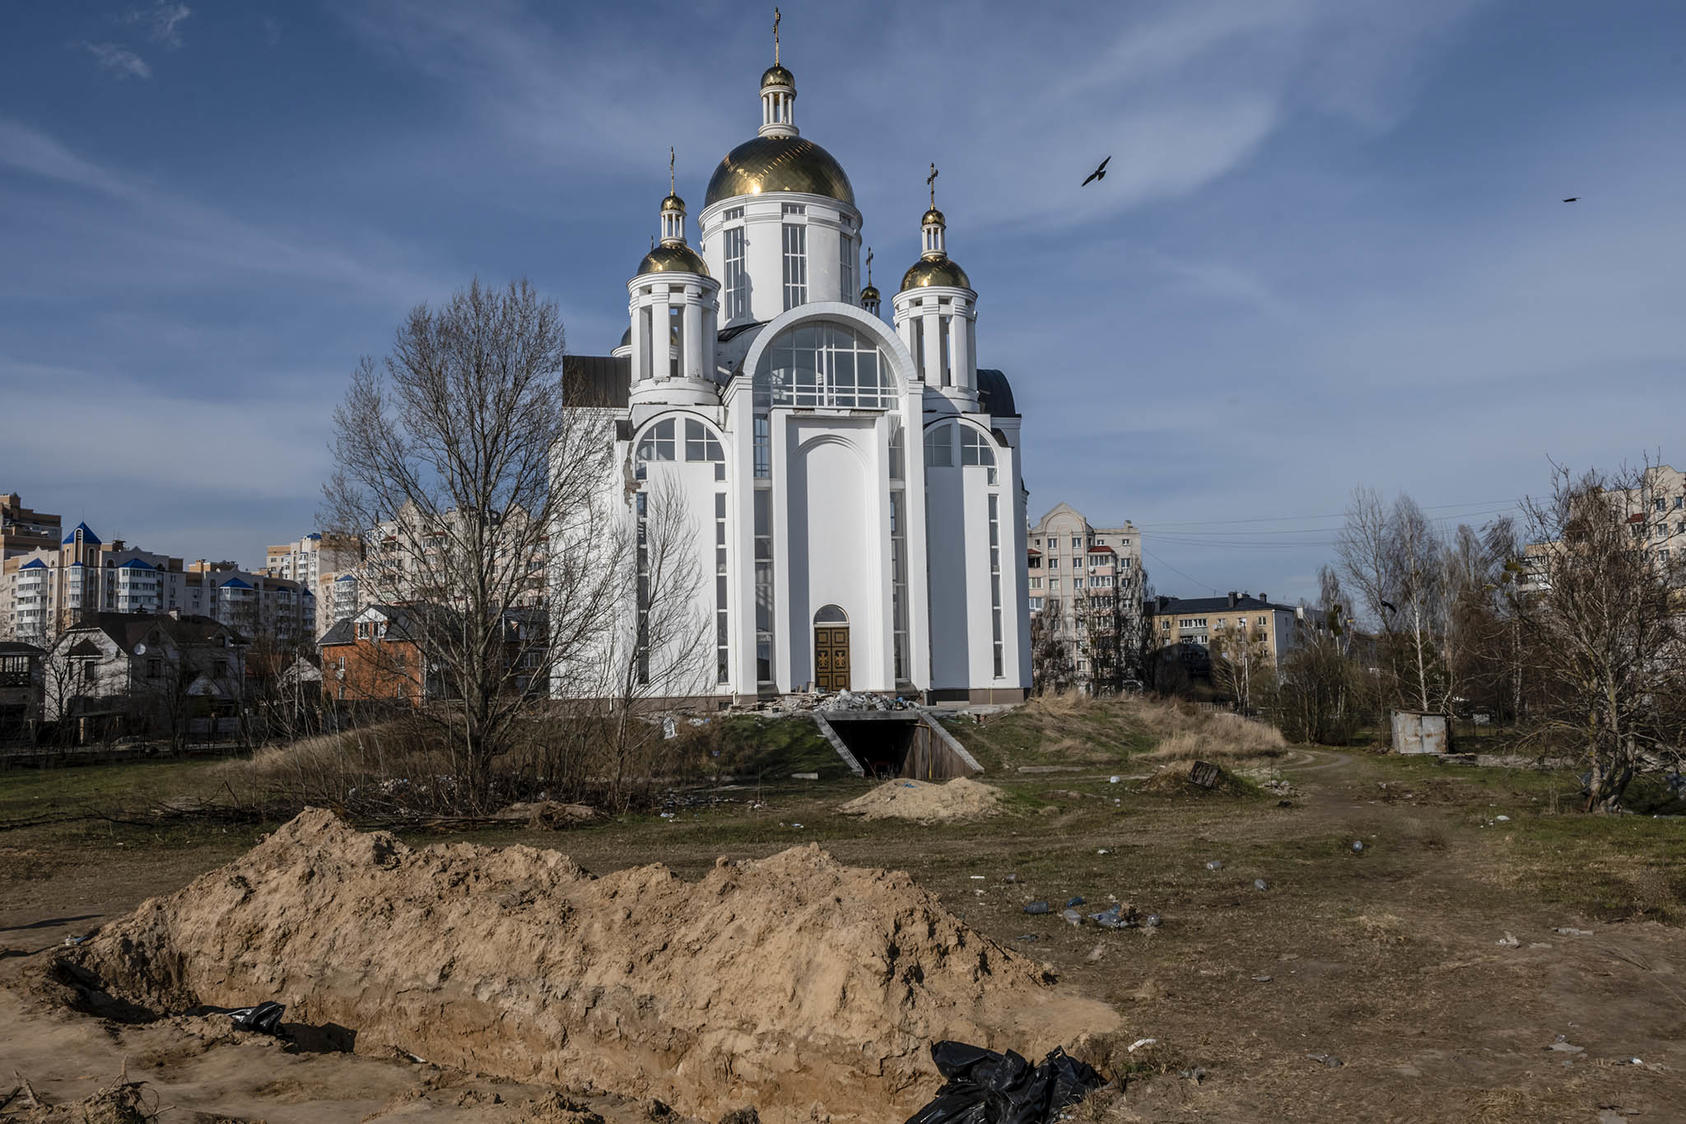 A mass grave on the grounds of the Church of St. Andrews in Bucha, Ukraine, April 7, 2022. (Daniel Berehulak/The New York Times)